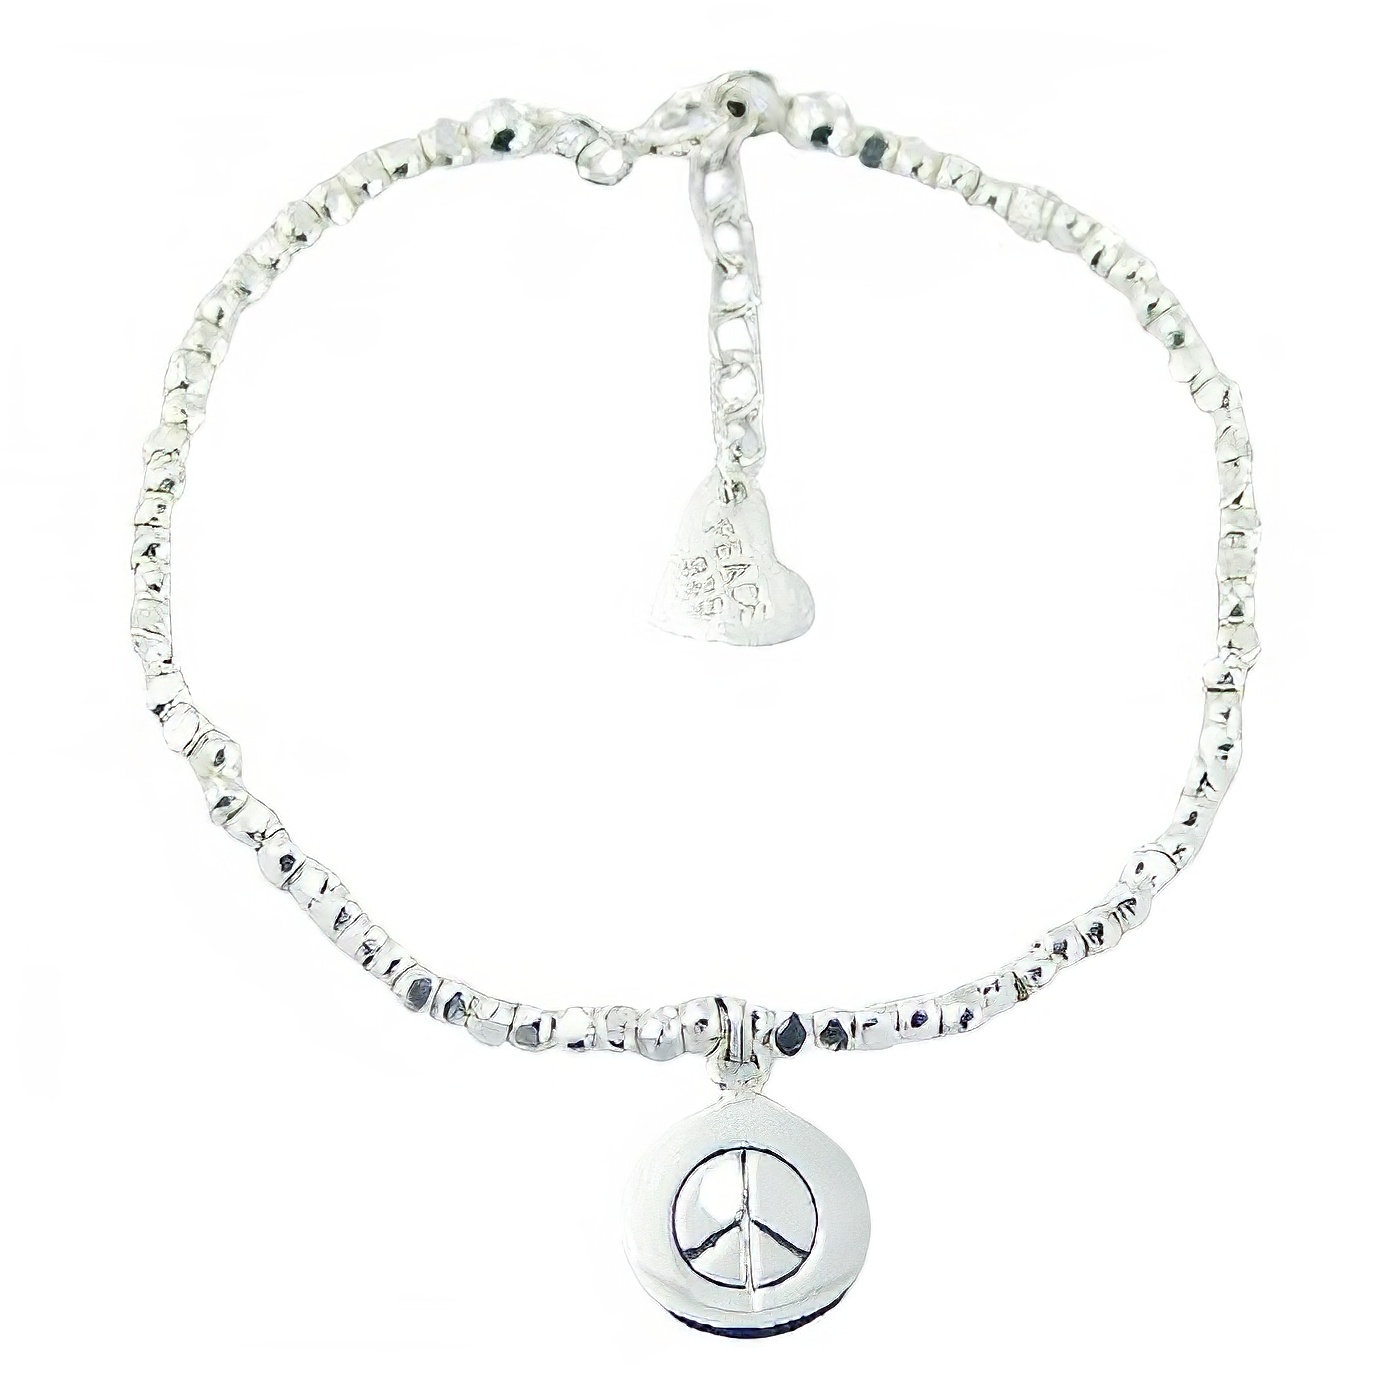 Sterling silver bracelet with cuboid beads and peace disc charm by BeYindi 